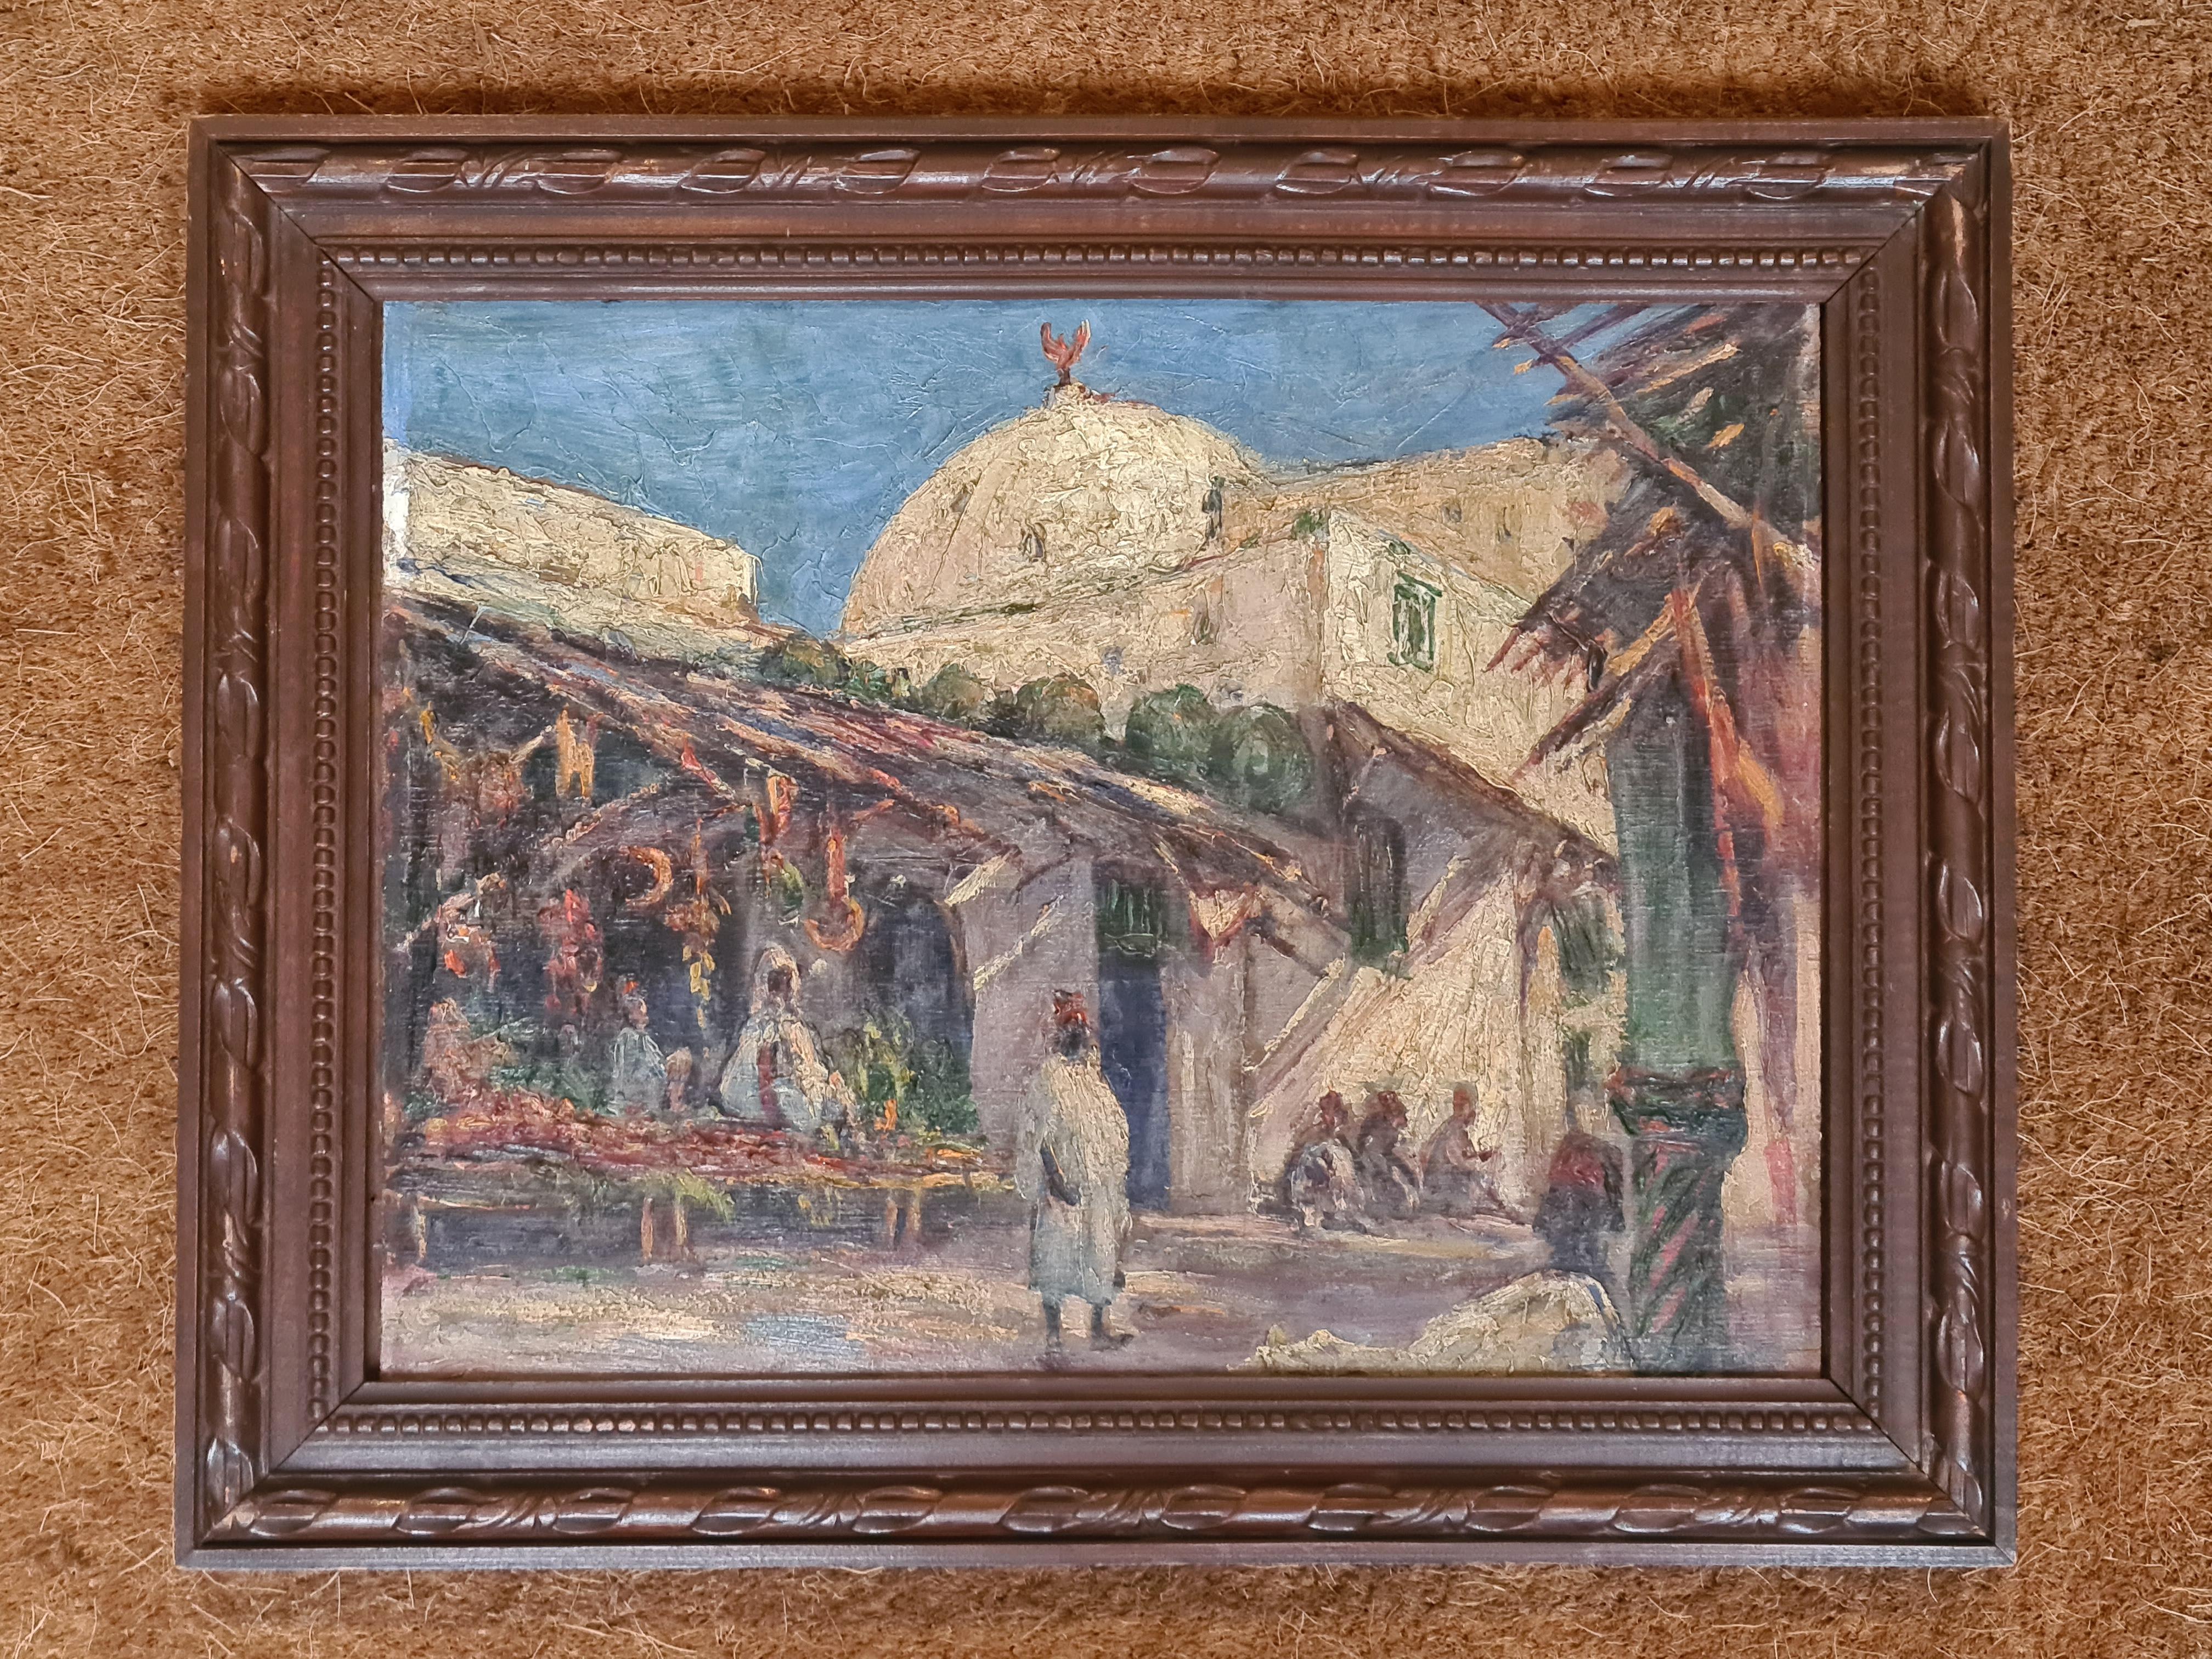 Orientalist View of Vendors in a Market, signed CA - Painting by Unknown